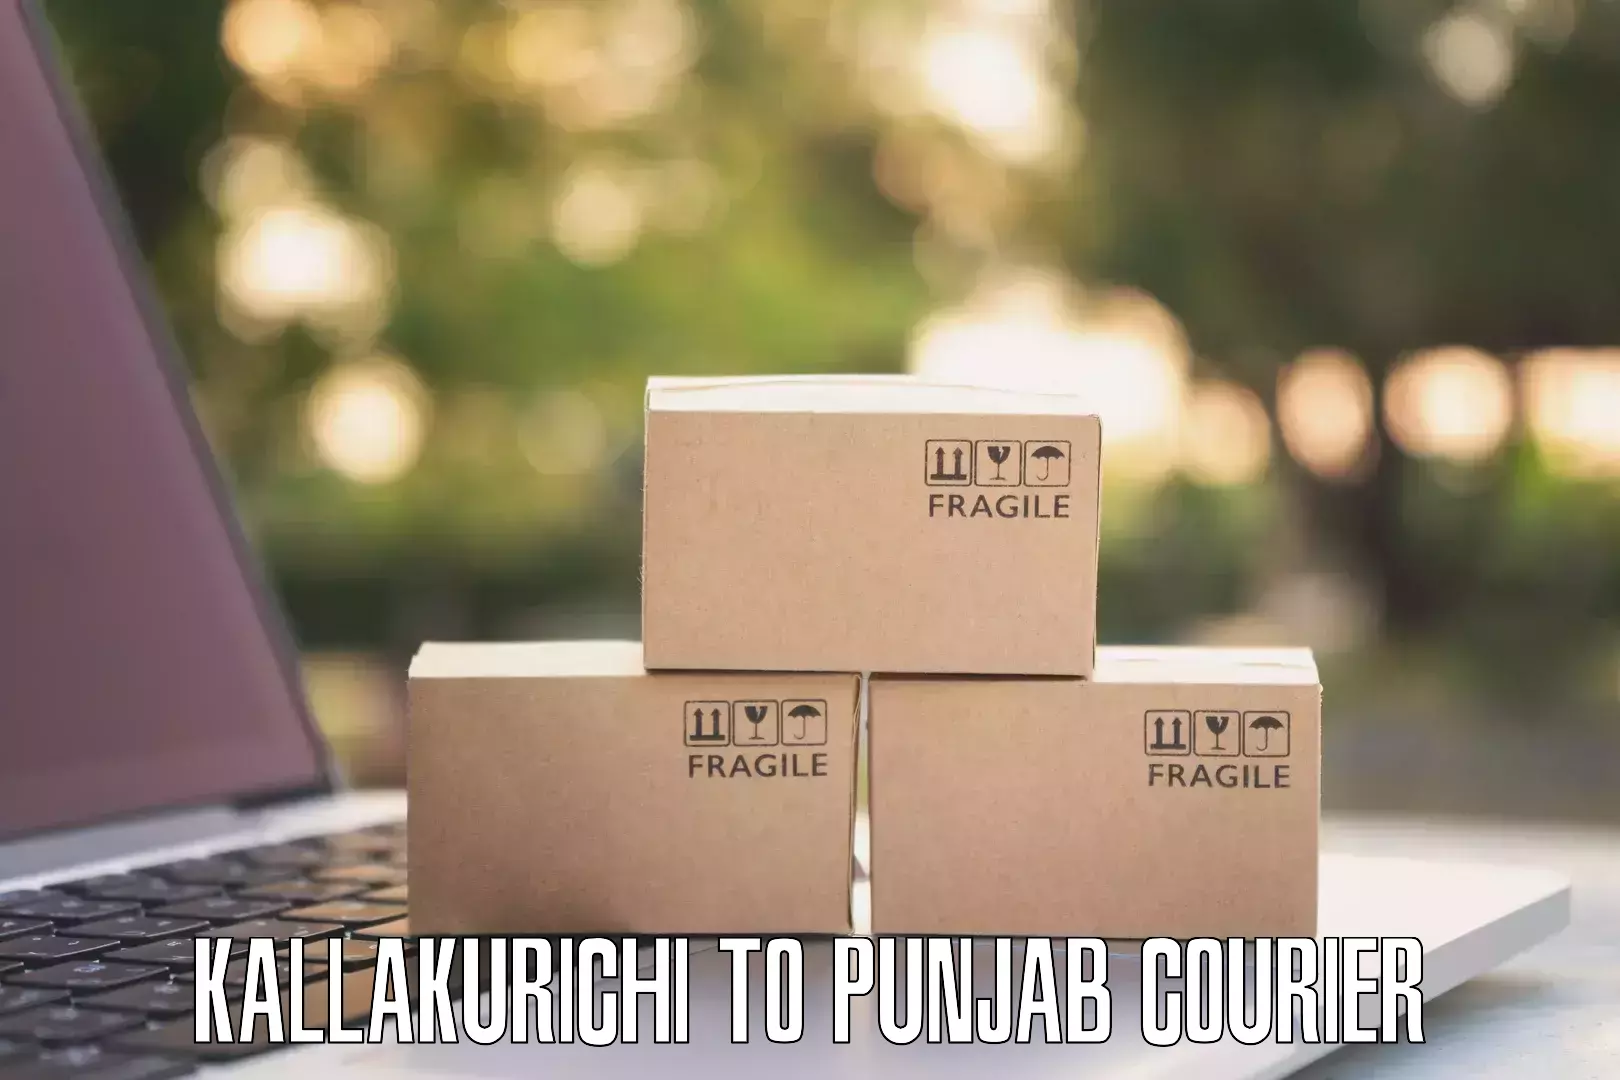 Courier service efficiency Kallakurichi to Malout